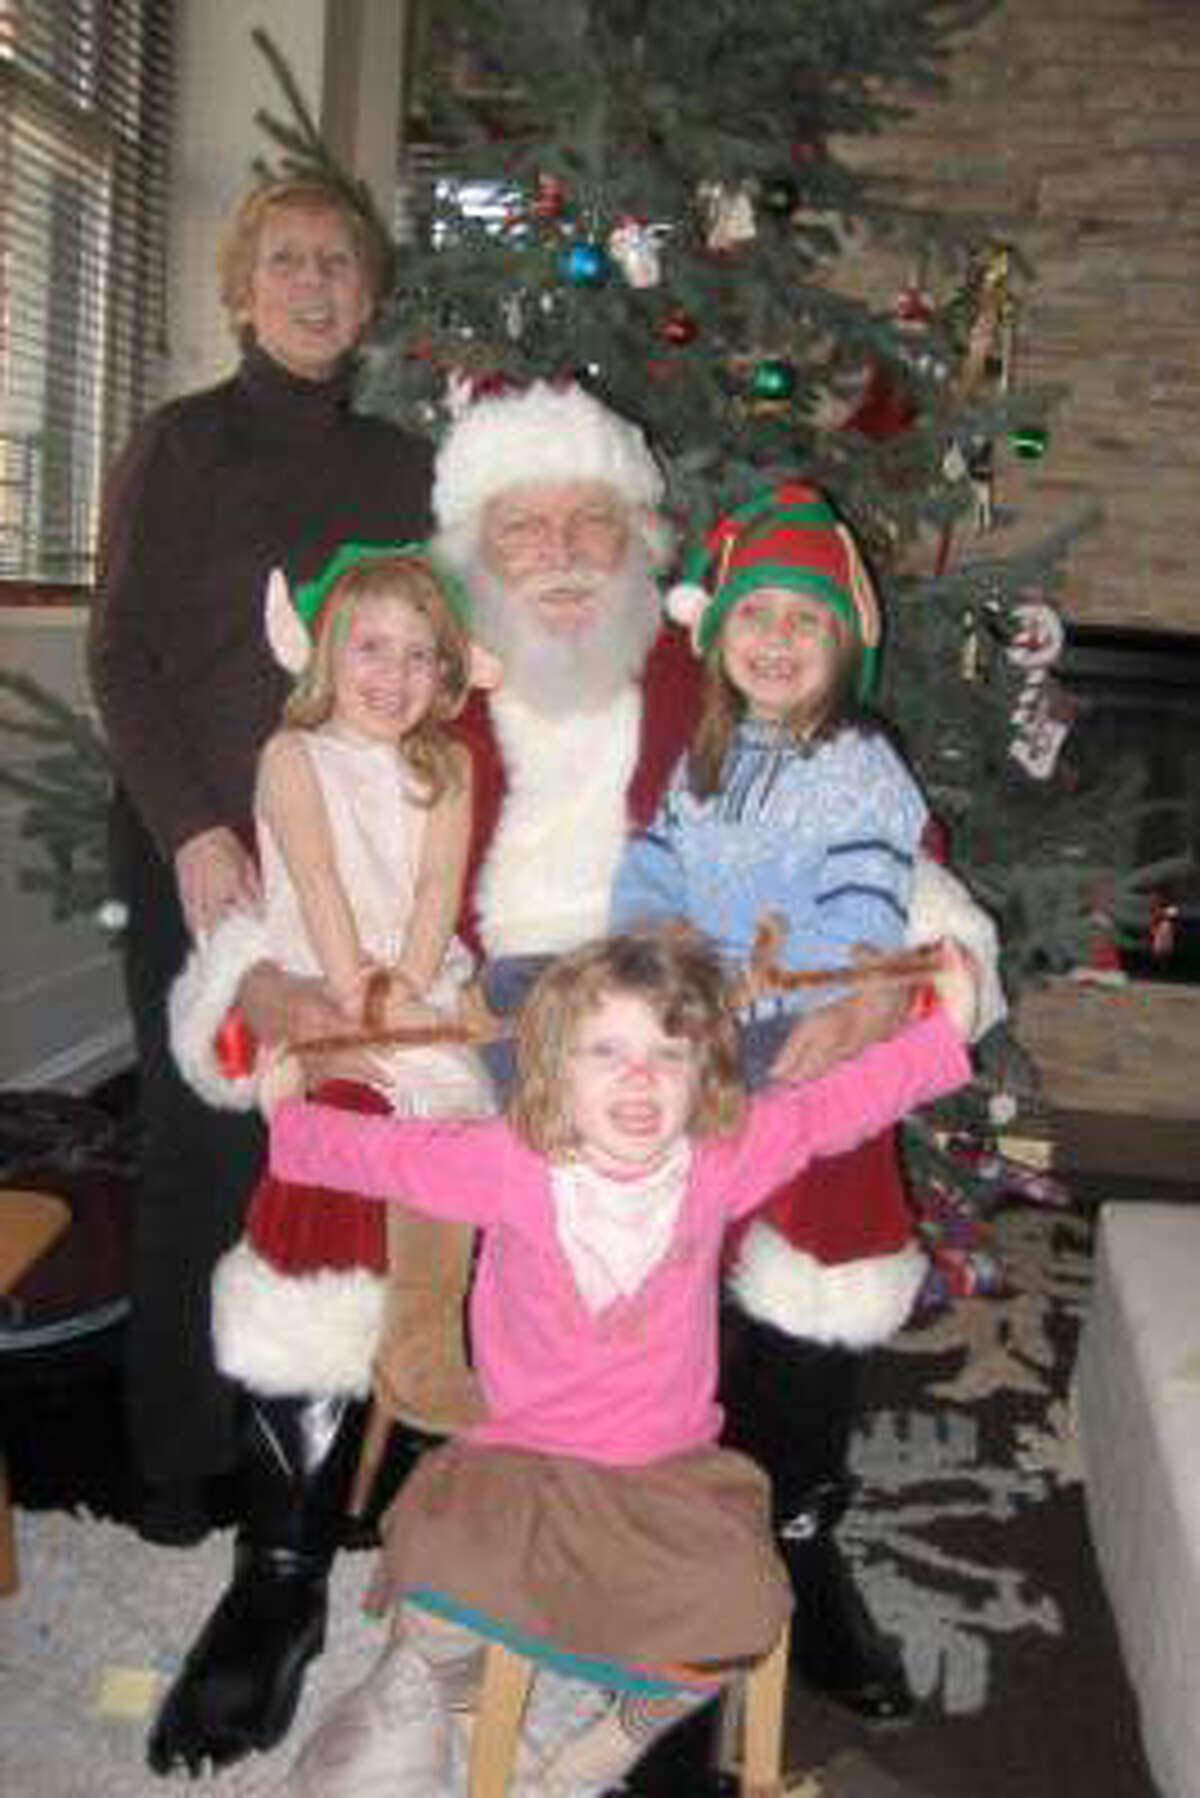 Courtesy of the Johnson family A photograph taken from the Web site gigmasters.com showing the five victims from Sunday's fire: Lomer Johnson, dressed as Santa; his wife, Pauline; and their granddaughters, Sarah, Grace, and Lily, left to right.